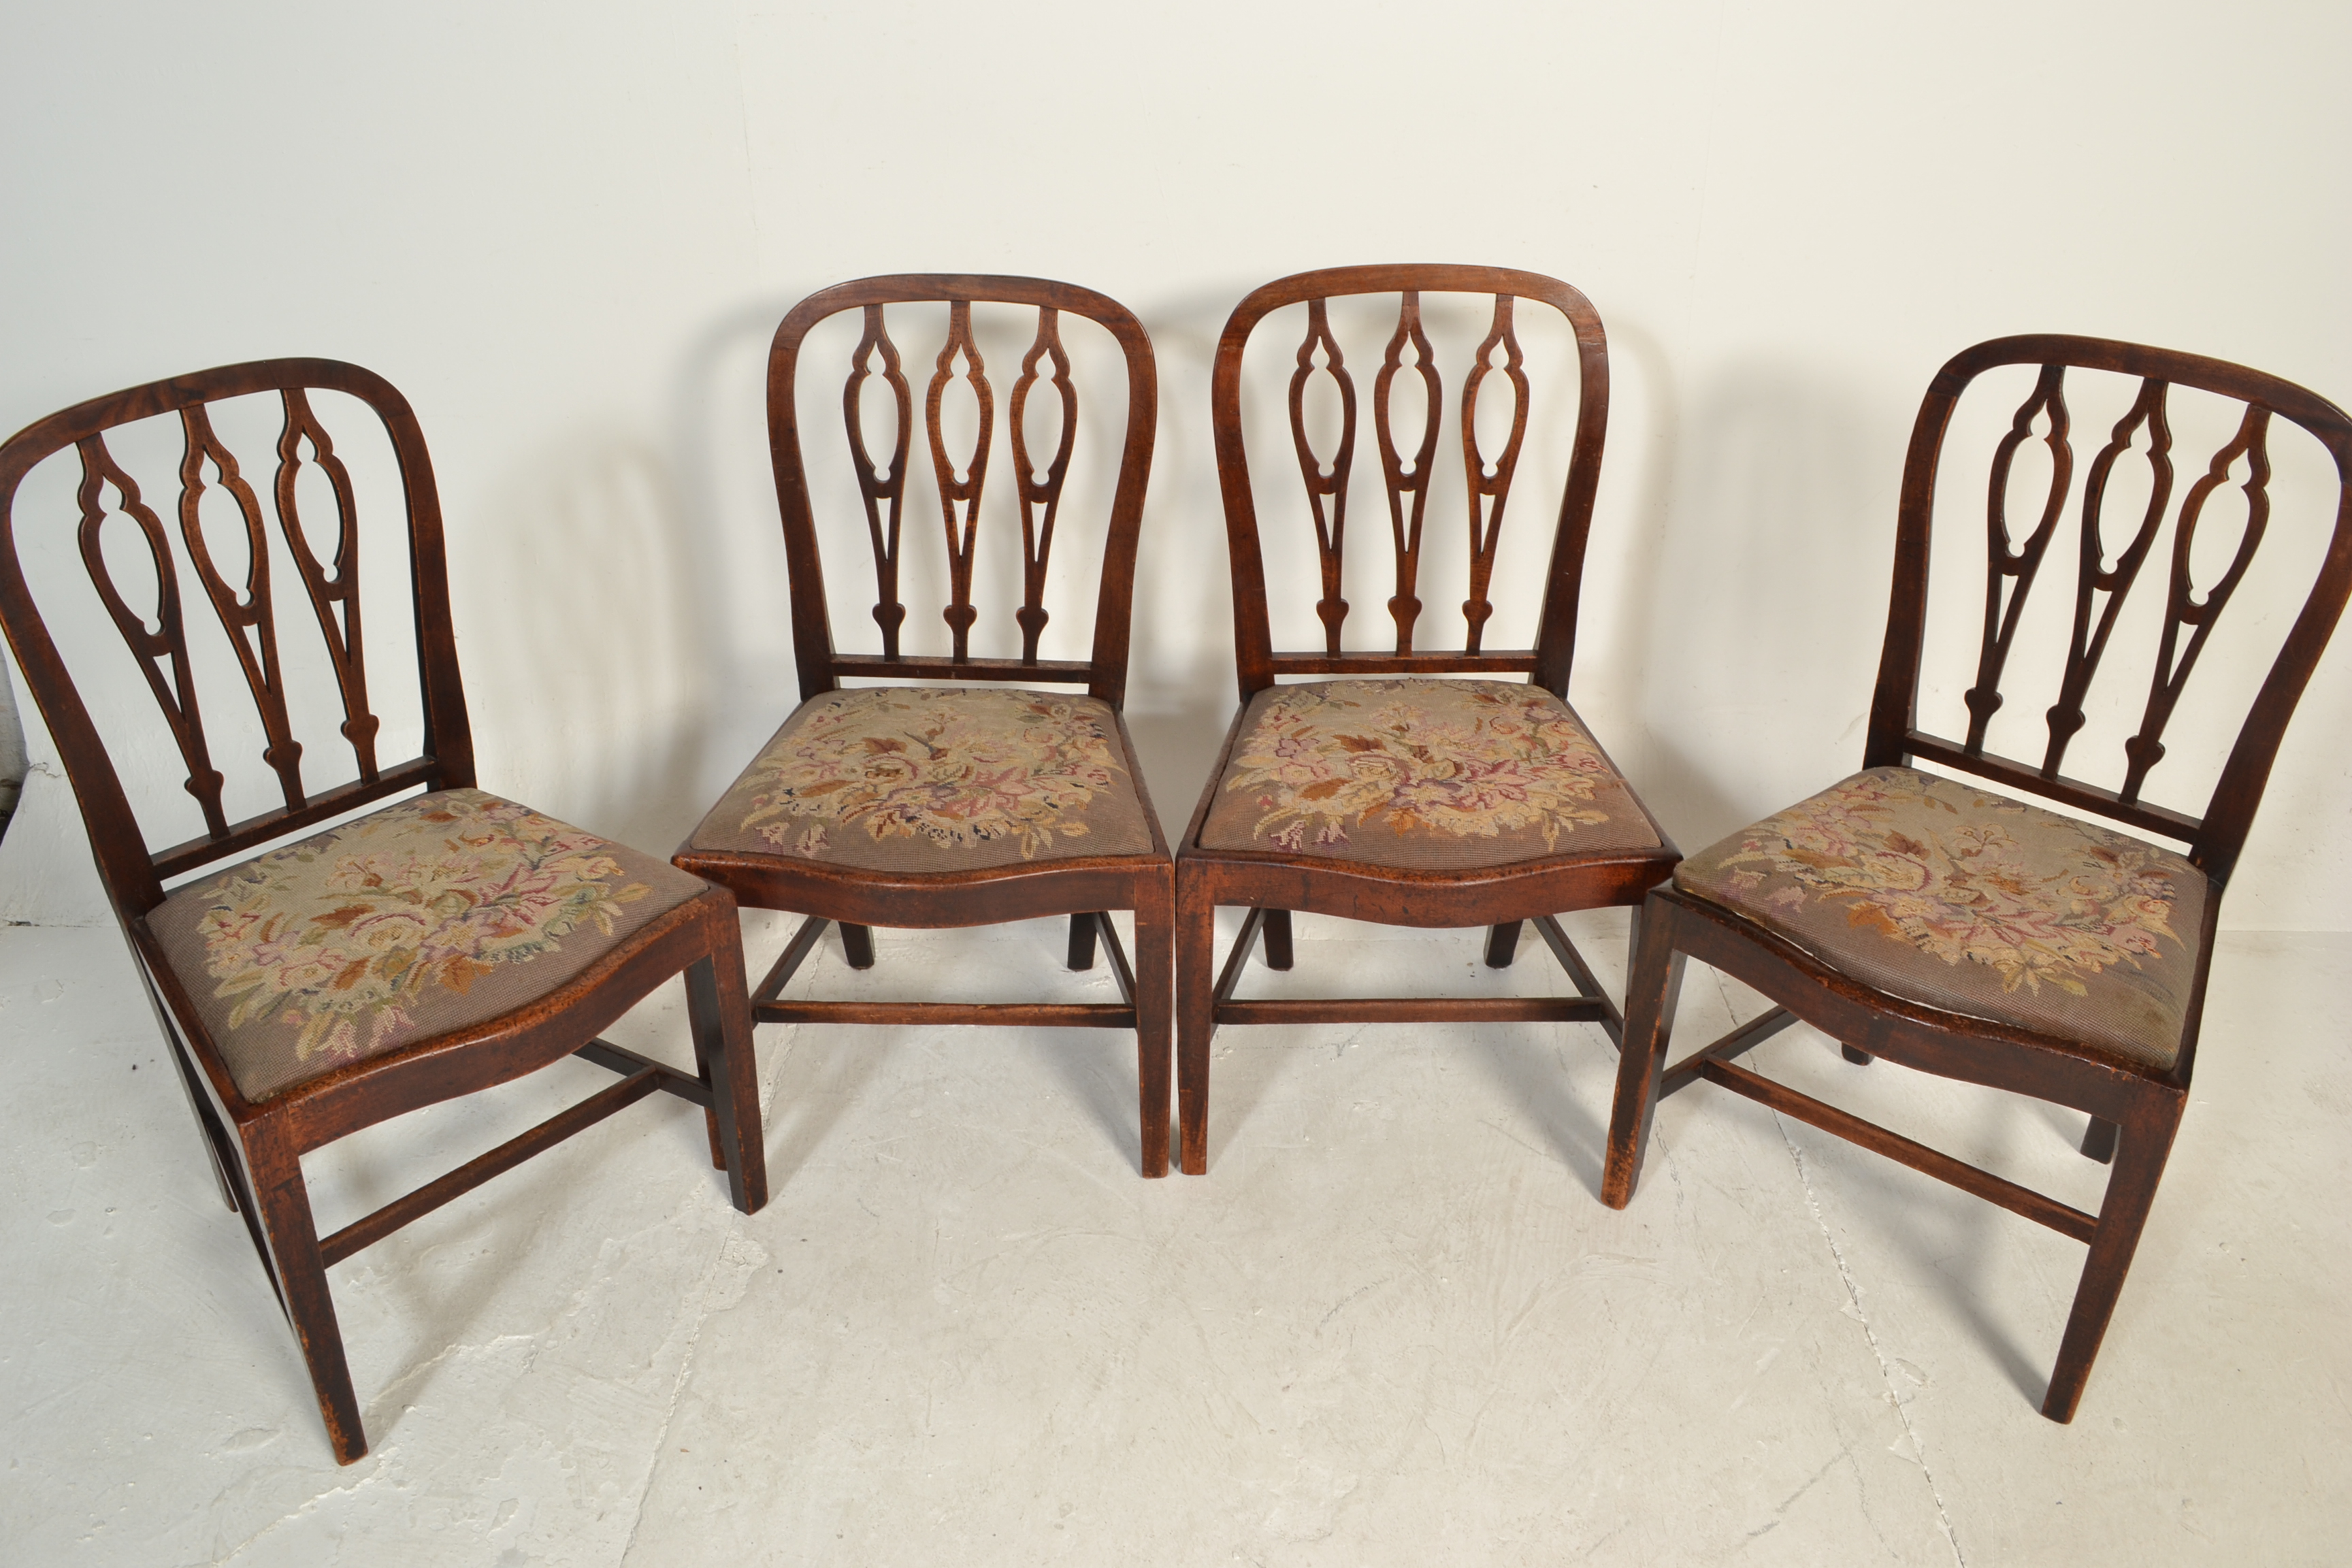 SET OF 6 19TH CENTURY GEORGE III MAHOGANY DINING CHAIRS - Image 29 of 32